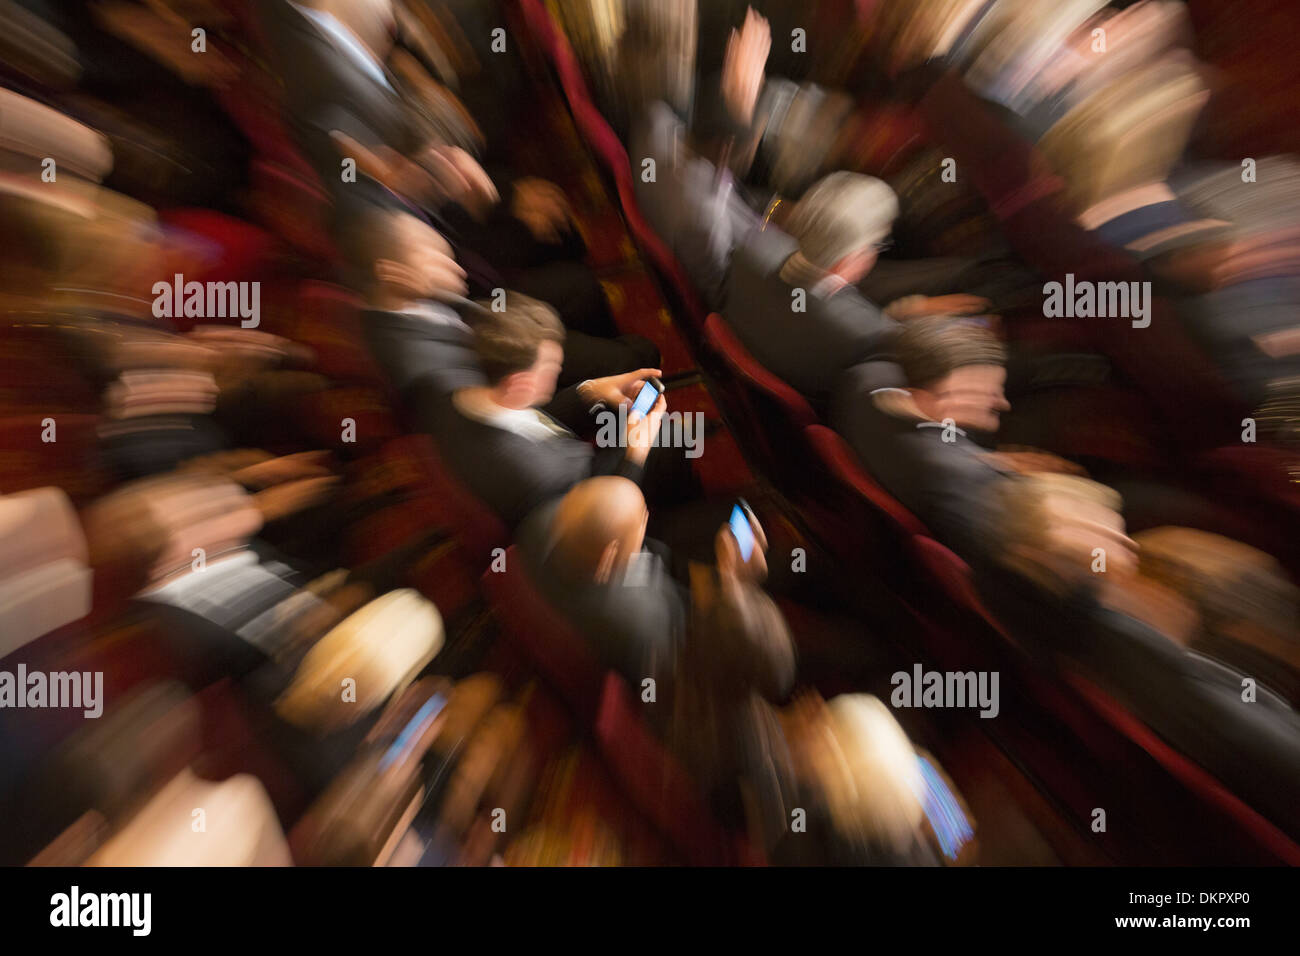 Defocused view of men using cell phones in theater audience Stock Photo